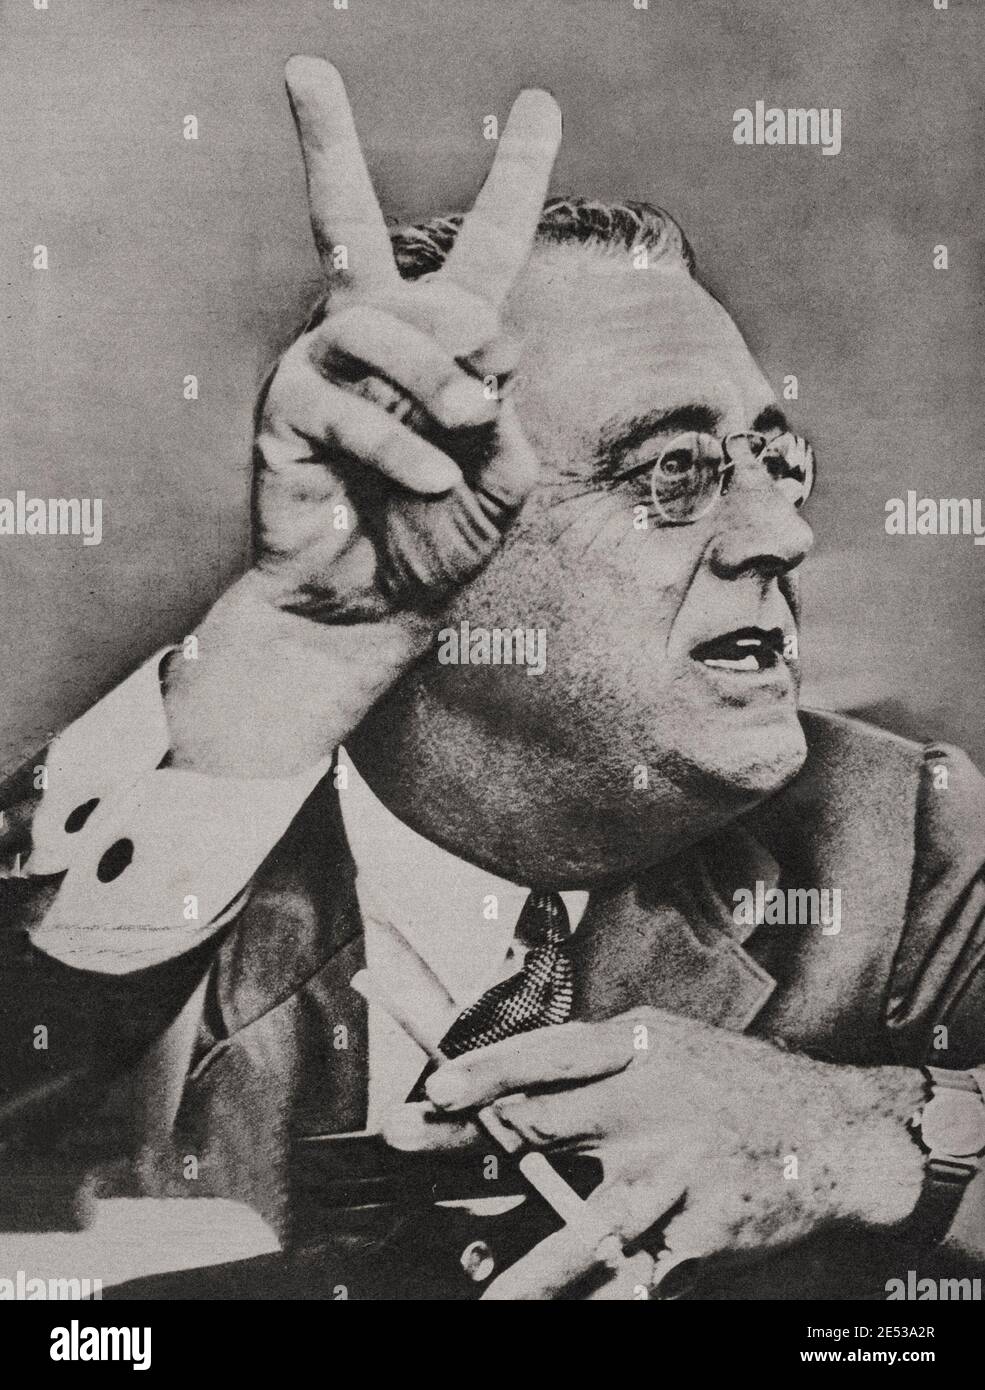 Archival photo of Franklin D. Roosevelt. From French magazine of November 21, 1942 The promising 'V'... This time, it is president Roosevelt who signs Stock Photo